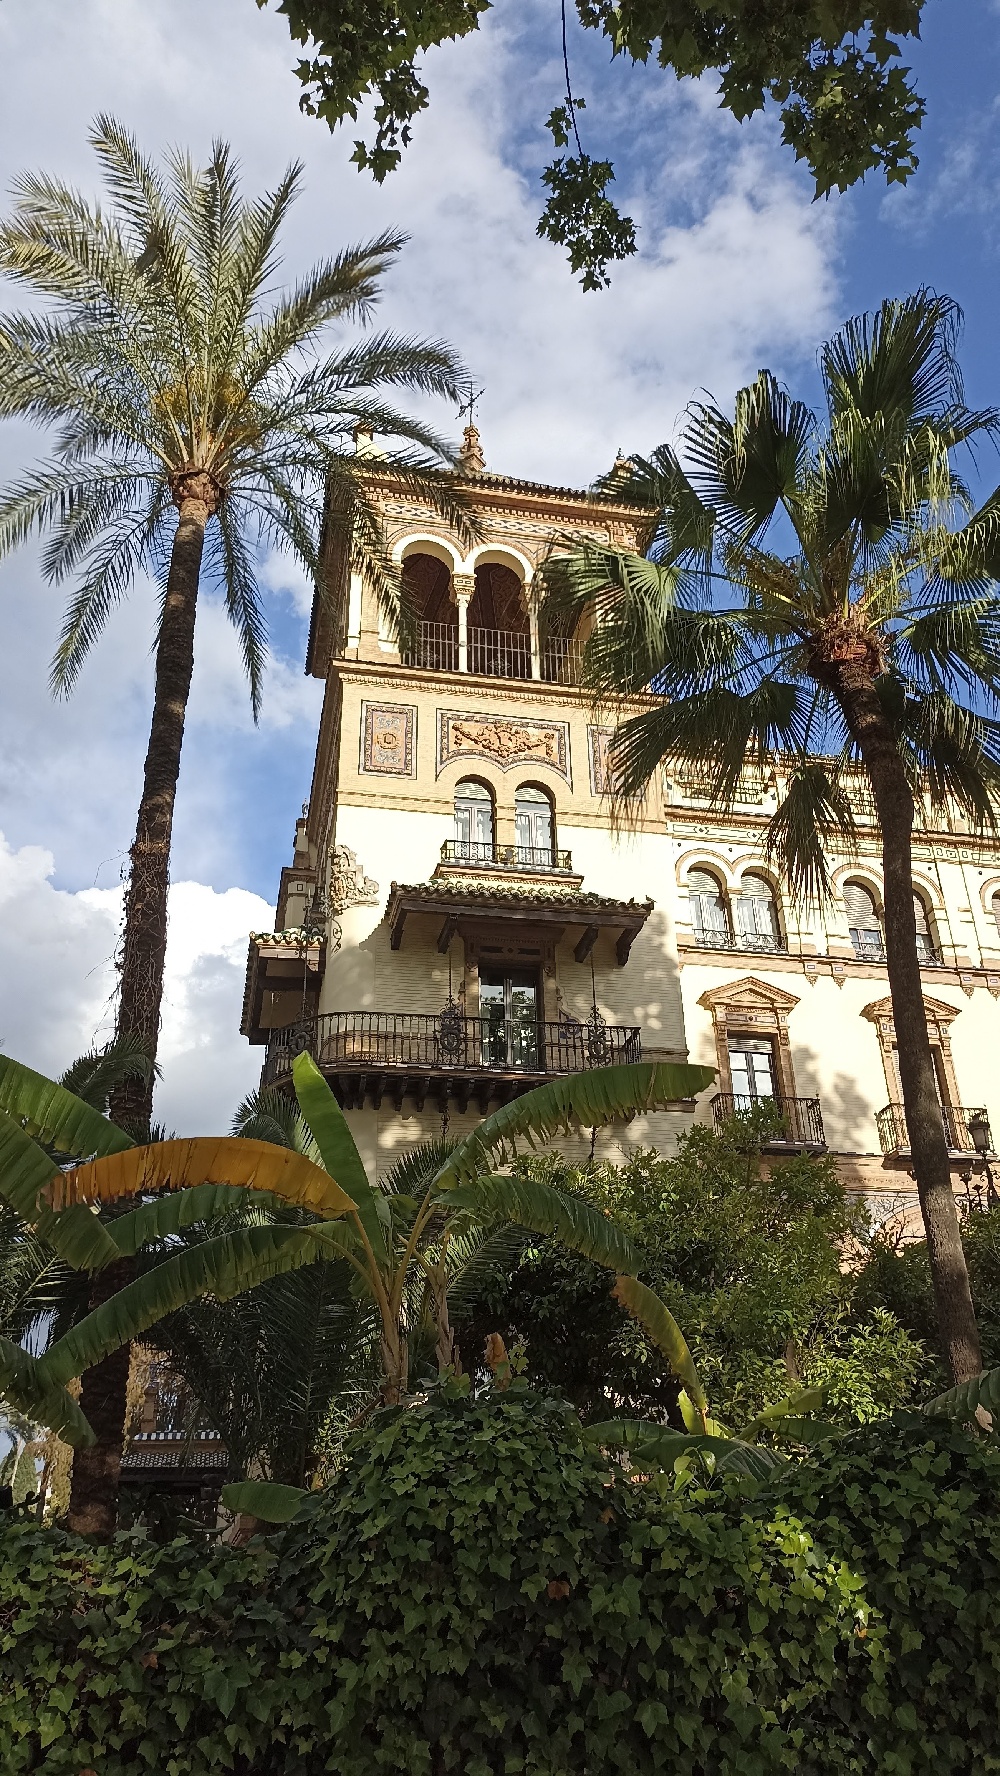 Spanish architecture building with palm trees